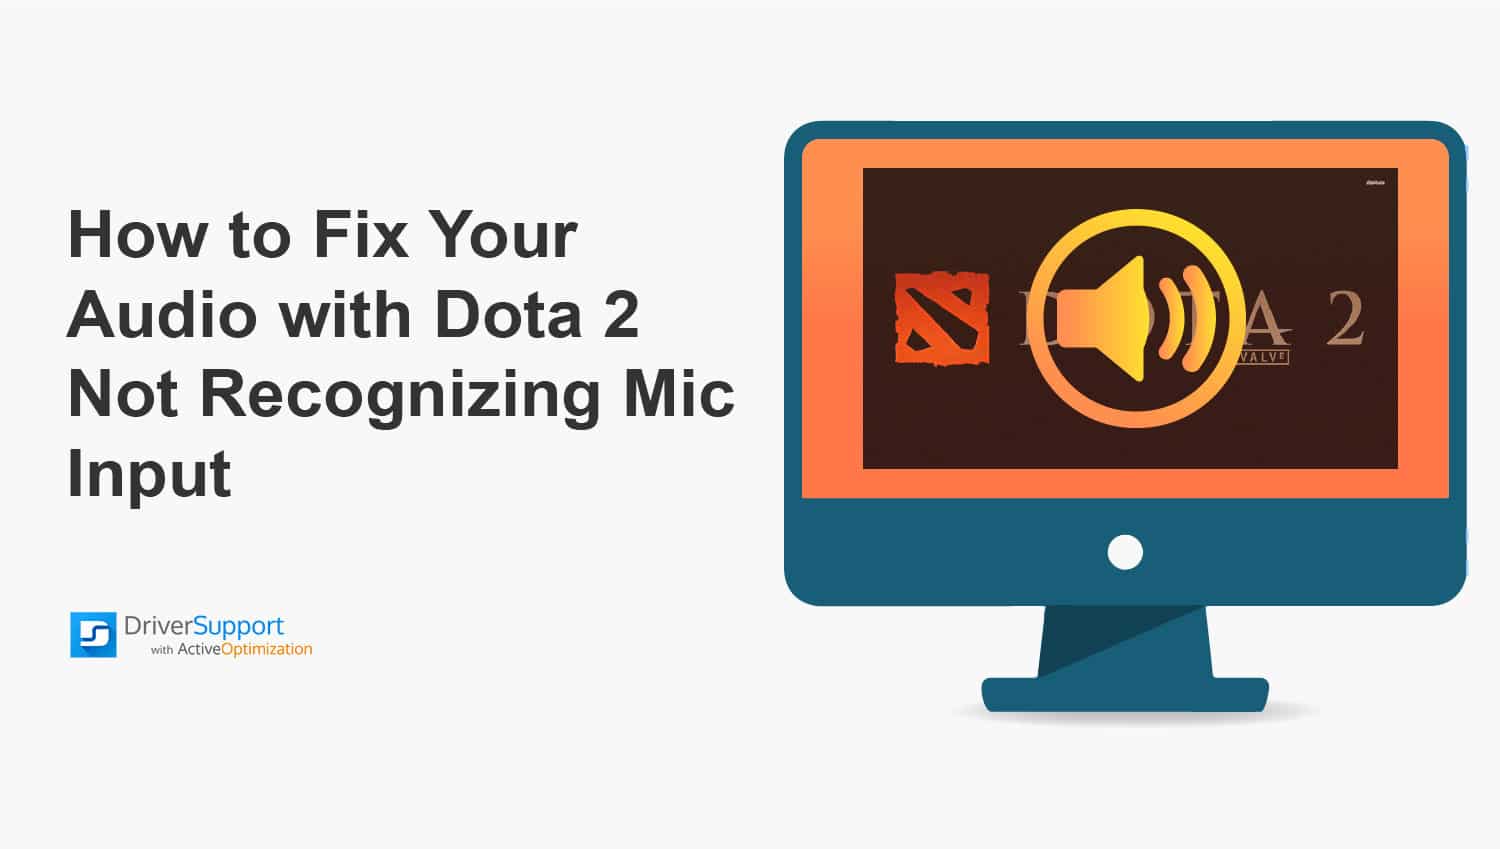 How To Fix Your Audio Issue With Dota 2 Not Recognizing Mic Input